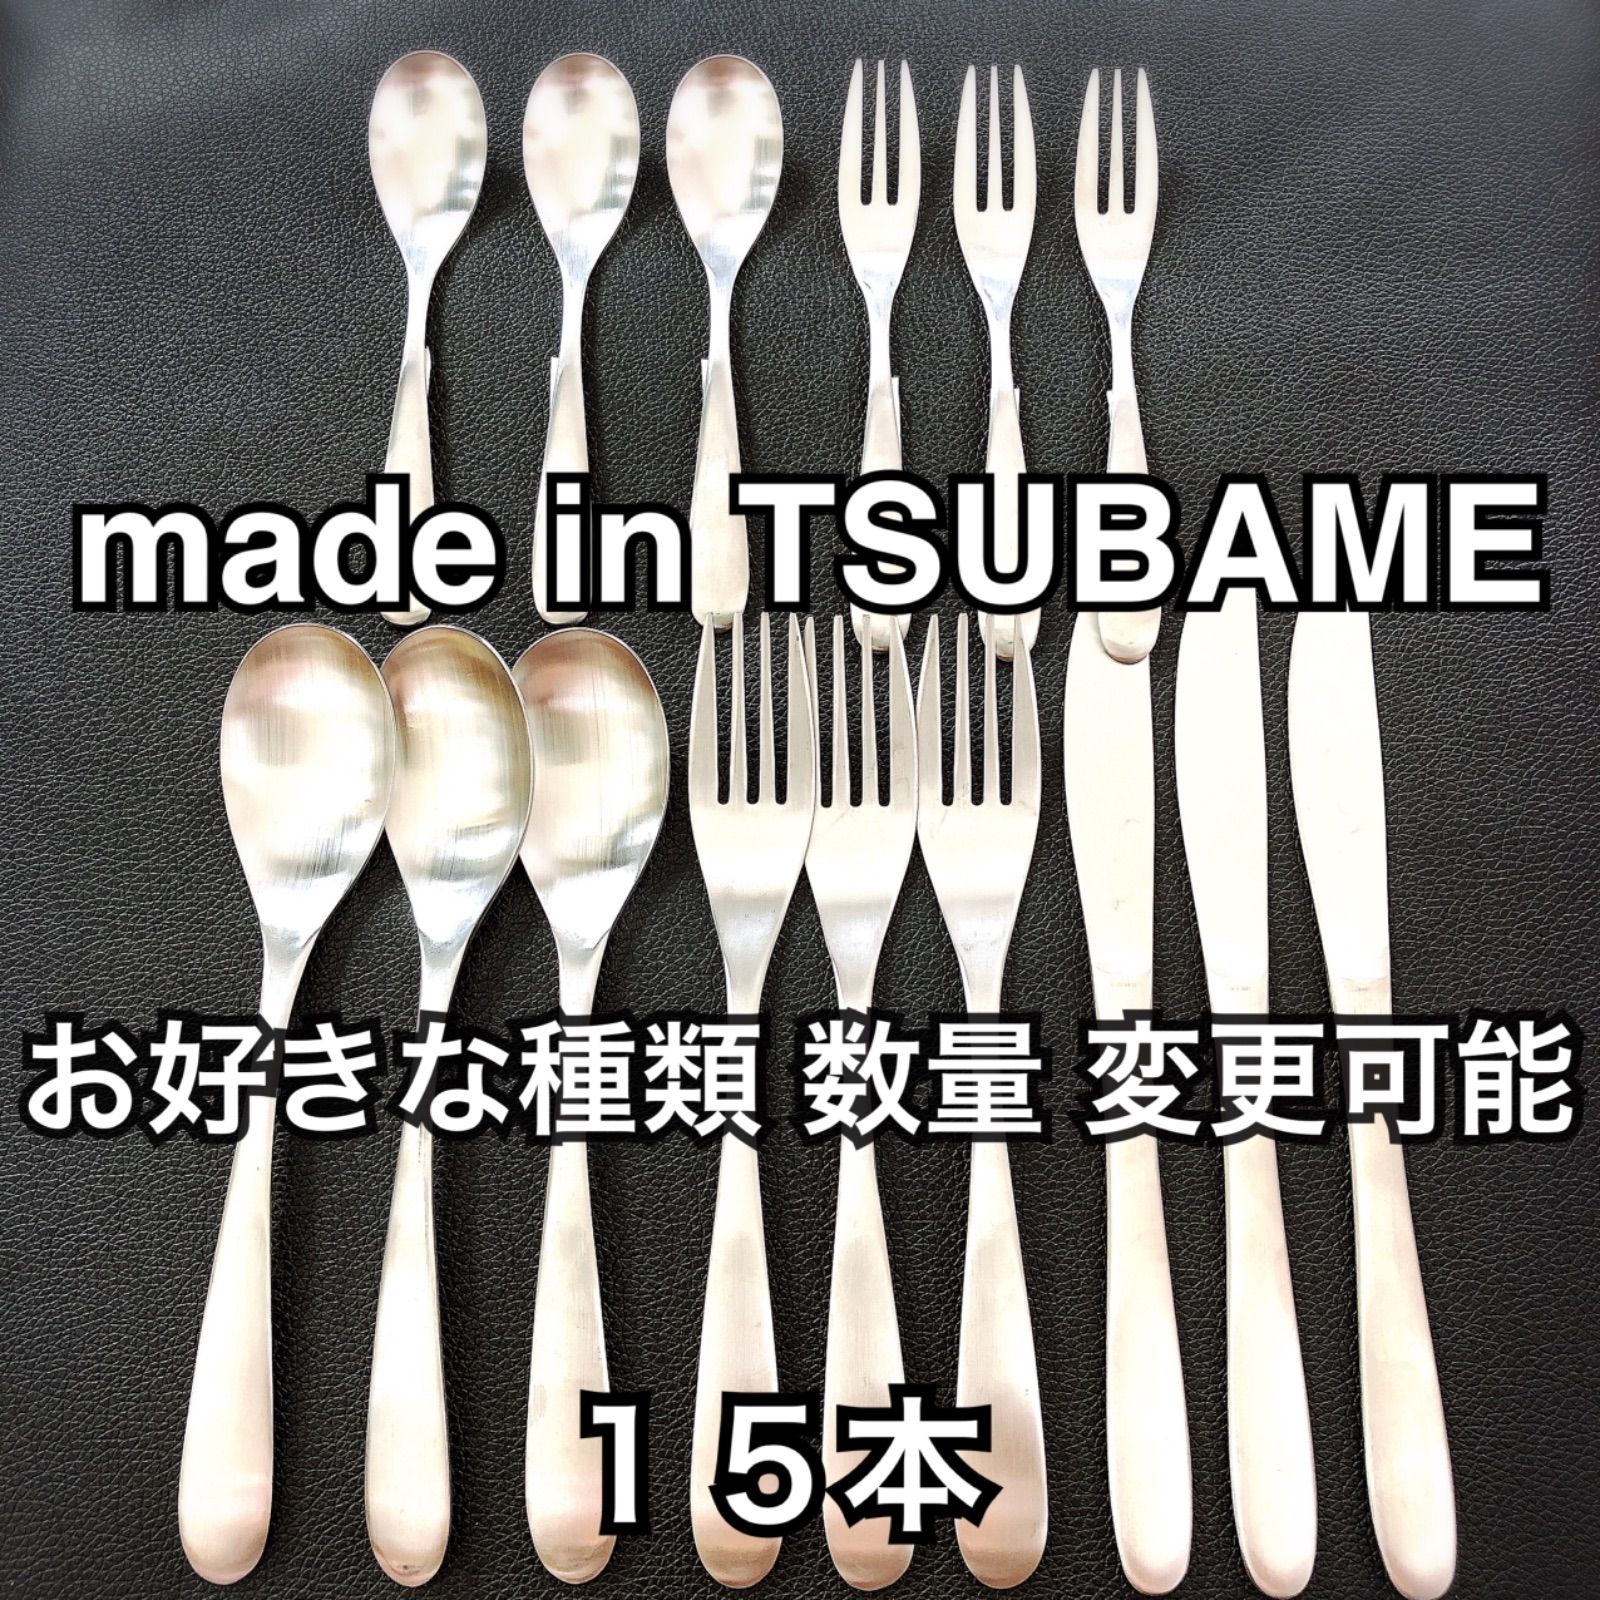 SALE／60%OFF】 made in TSUBAME 燕三条 ツバメカトラリー 4本セット スプーン小